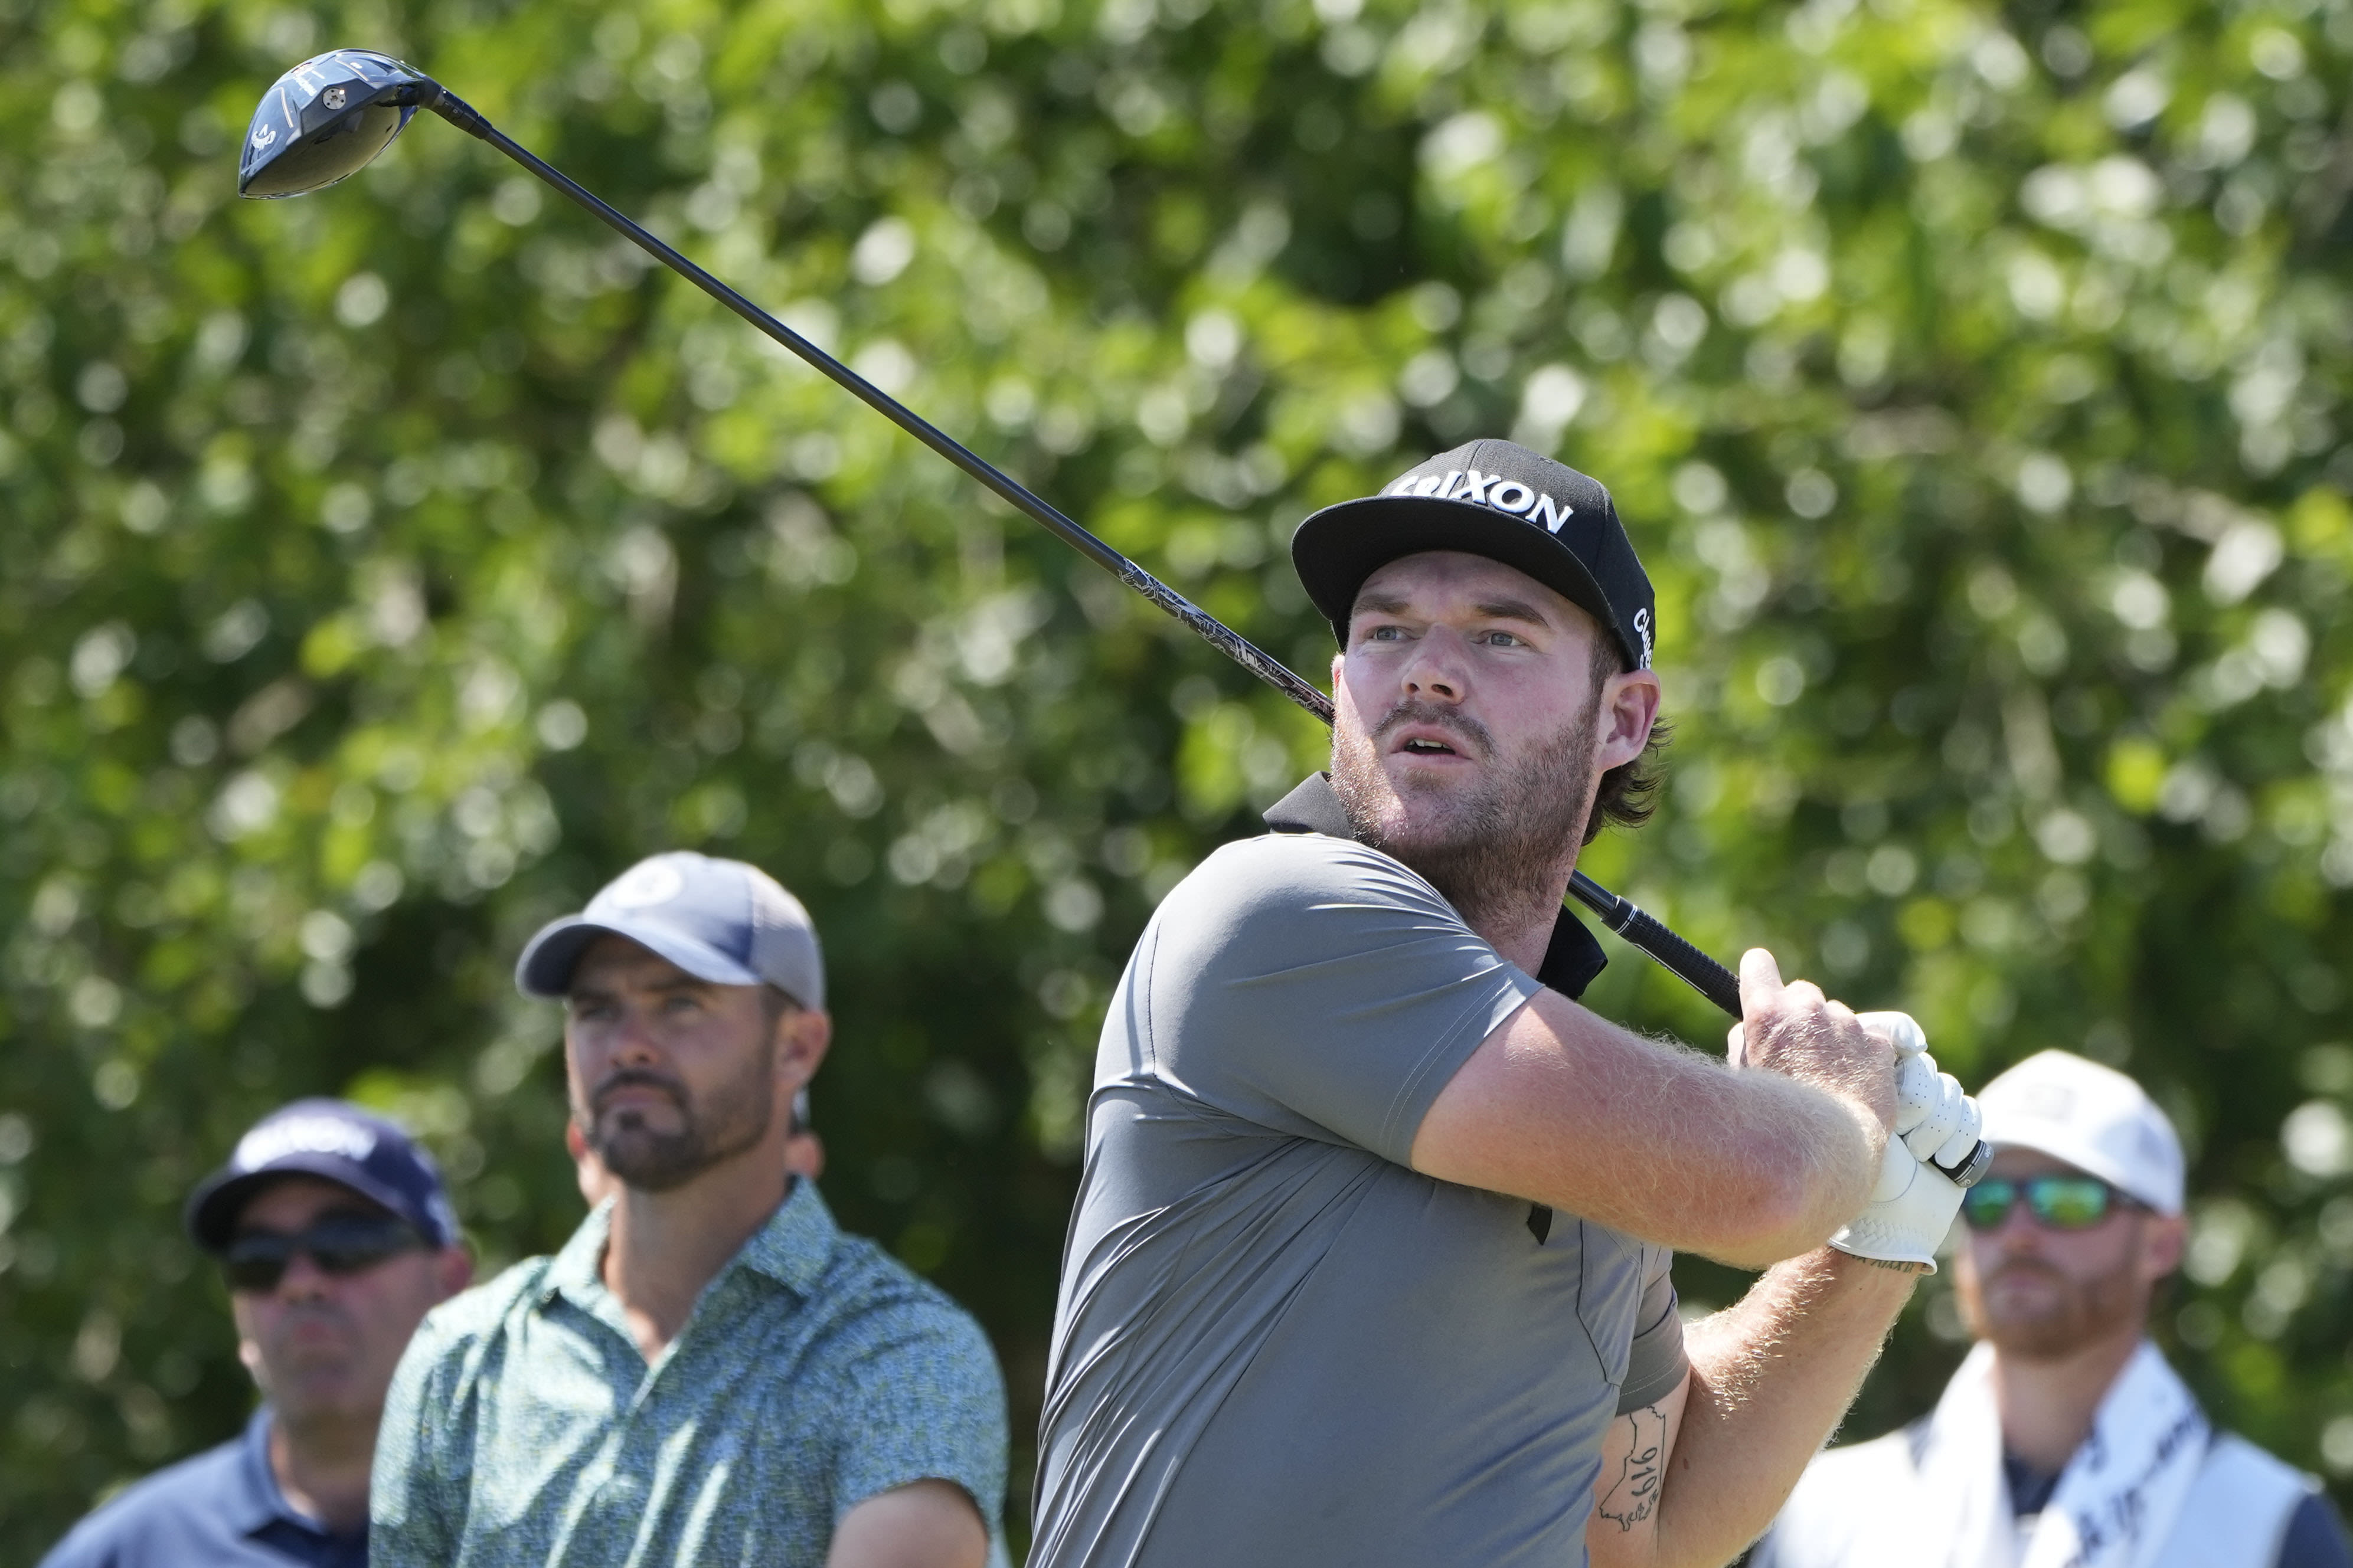 The late Grayson Murray is still part of golf's world ranking for another few weeks